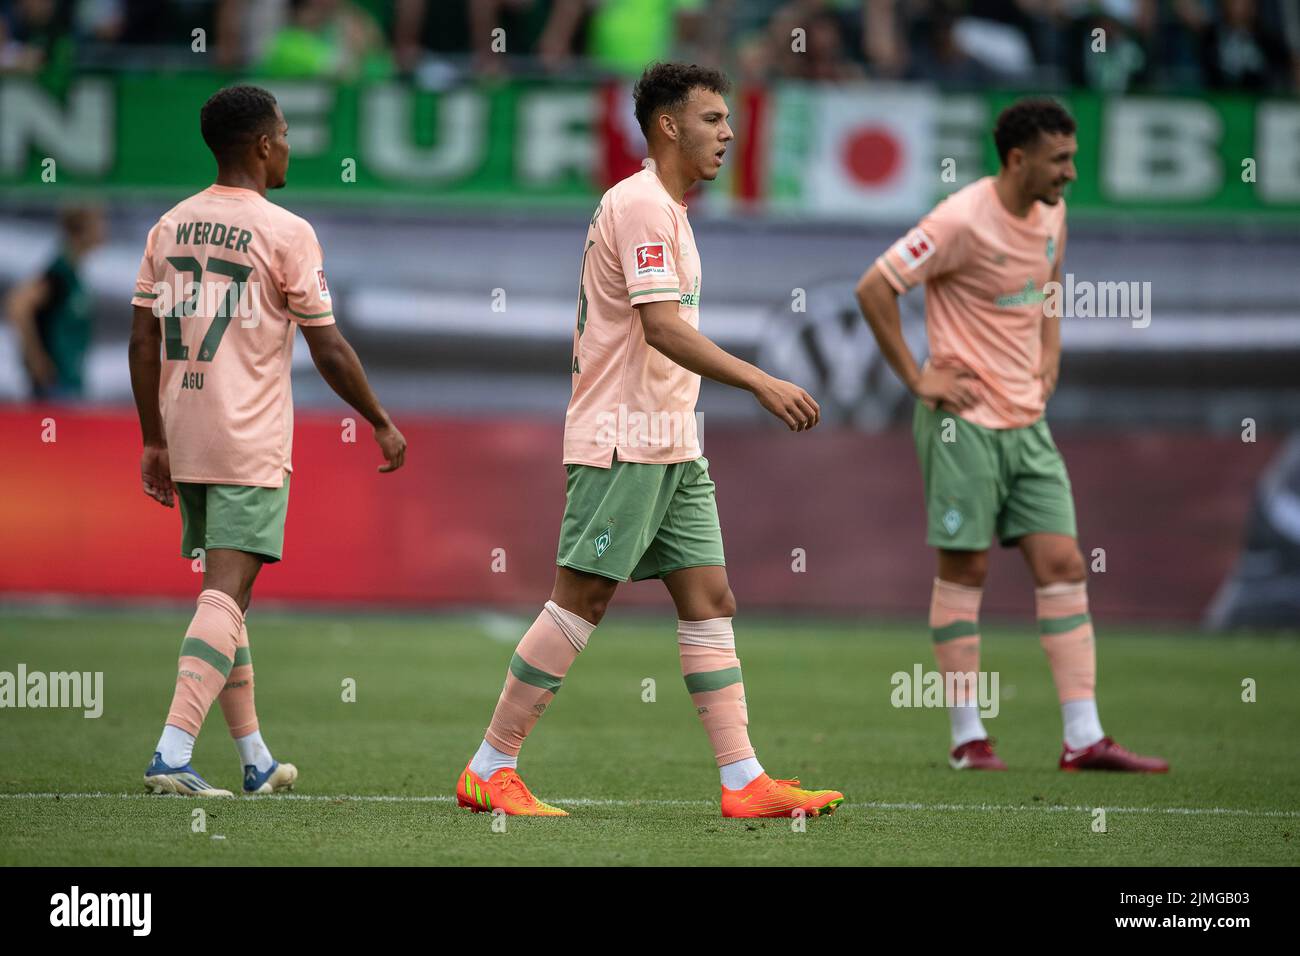 06 August 2022, Lower Saxony, Wolfsburg: Soccer, Bundesliga, VfL Wolfsburg - SV Werder Bremen, Matchday 1, Volkswagen Arena. Bremen's Lee Buchanan (m) and Bremen's Felix Agu (l) stand on the field after the match. Photo: Swen Pförtner/dpa - IMPORTANT NOTE: In accordance with the requirements of the DFL Deutsche Fußball Liga and the DFB Deutscher Fußball-Bund, it is prohibited to use or have used photographs taken in the stadium and/or of the match in the form of sequence pictures and/or video-like photo series. Stock Photo